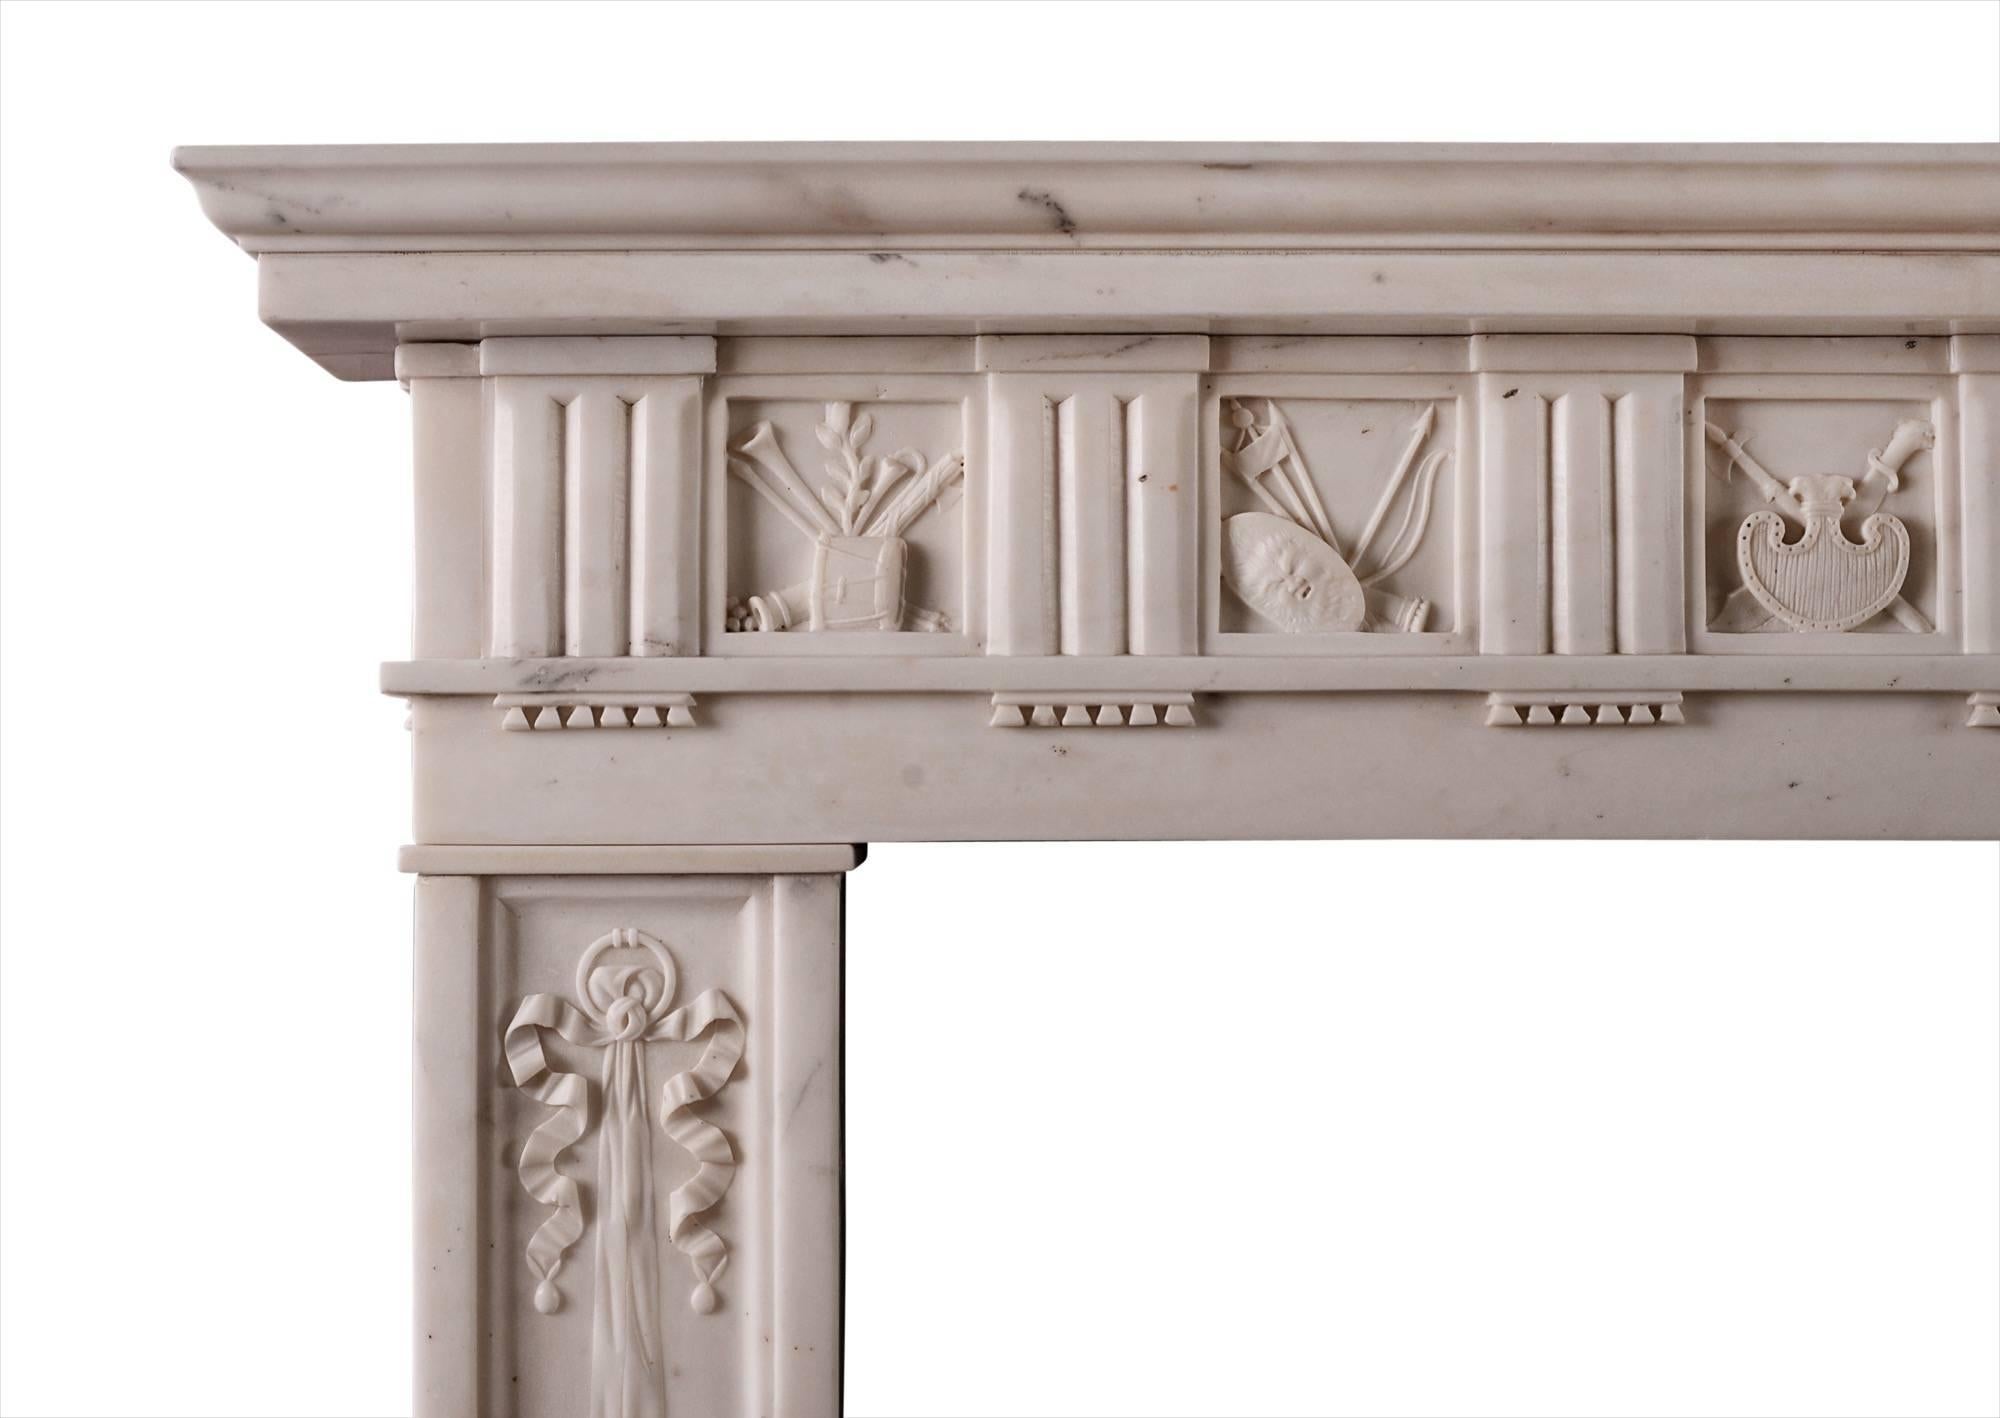 A fine quality English Regency fireplace in Italian statuary marble. The frieze with interspersed flutes and carved panels depicting pipes and other musical instruments. The jambs with cascading ribbons, amphorae, pipes and rosette paterae. Moulded